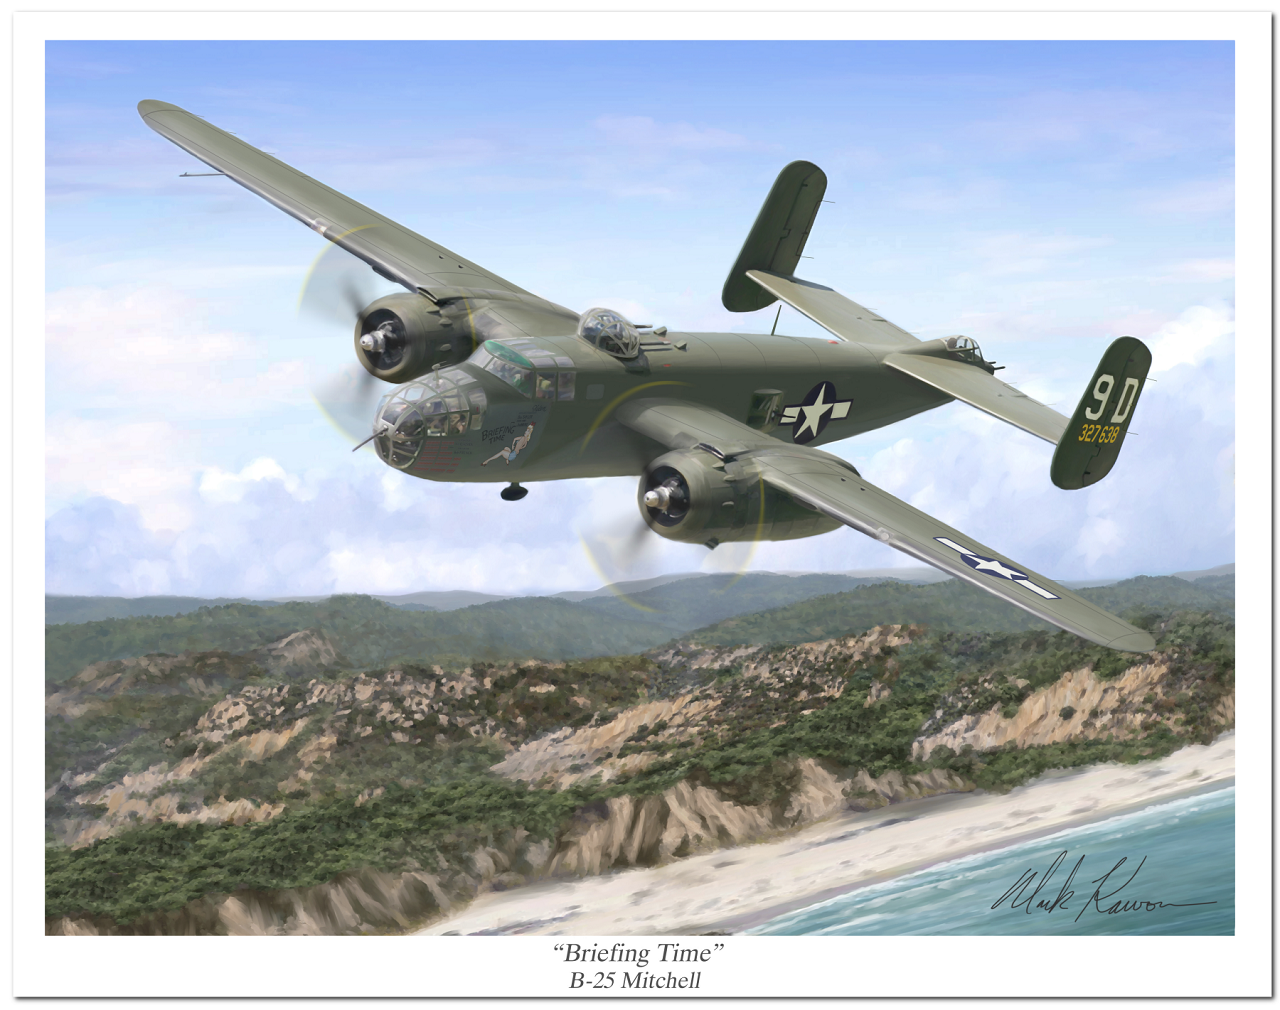 "Briefing Time" by Mark Karvon featuring the USAAF B-25 Mitchell